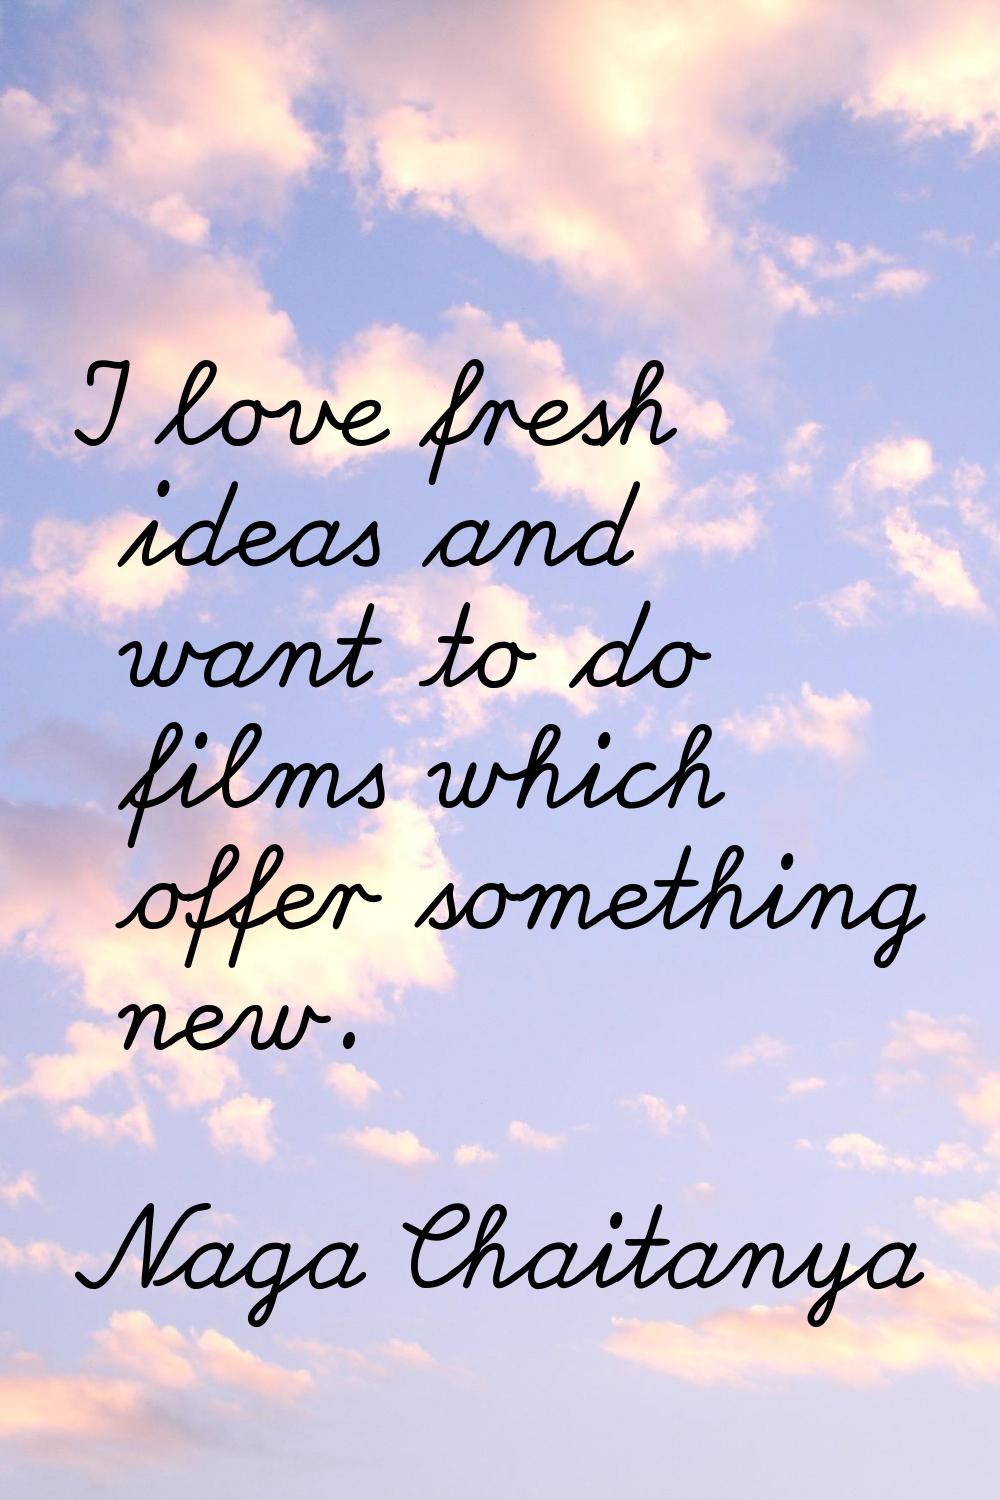 I love fresh ideas and want to do films which offer something new.